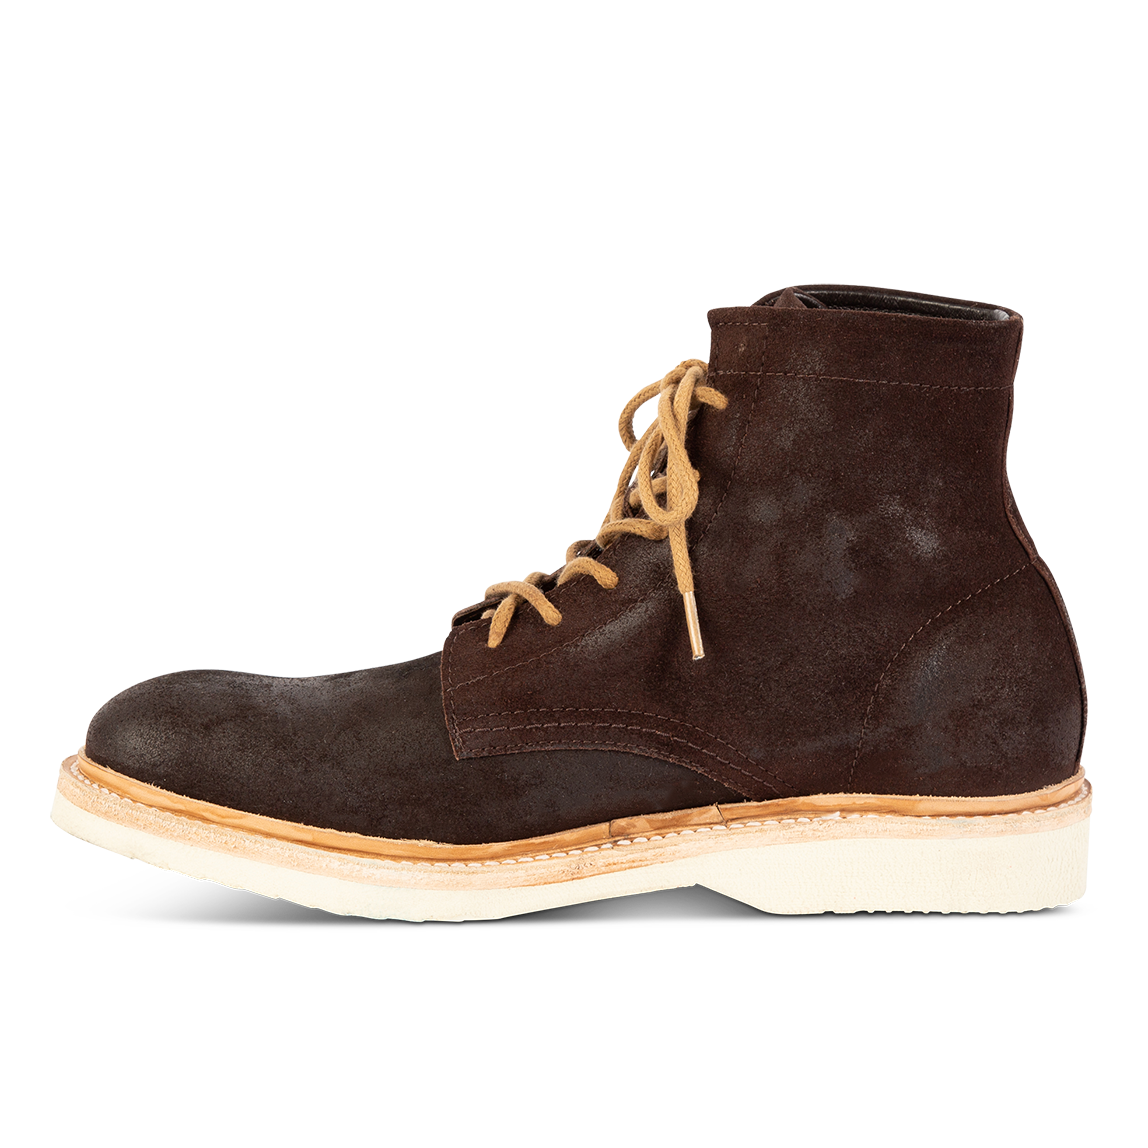 Inside view showing contrasting suede upper and soft sole on FREEBIRD men's Wheeler brown suede shoe